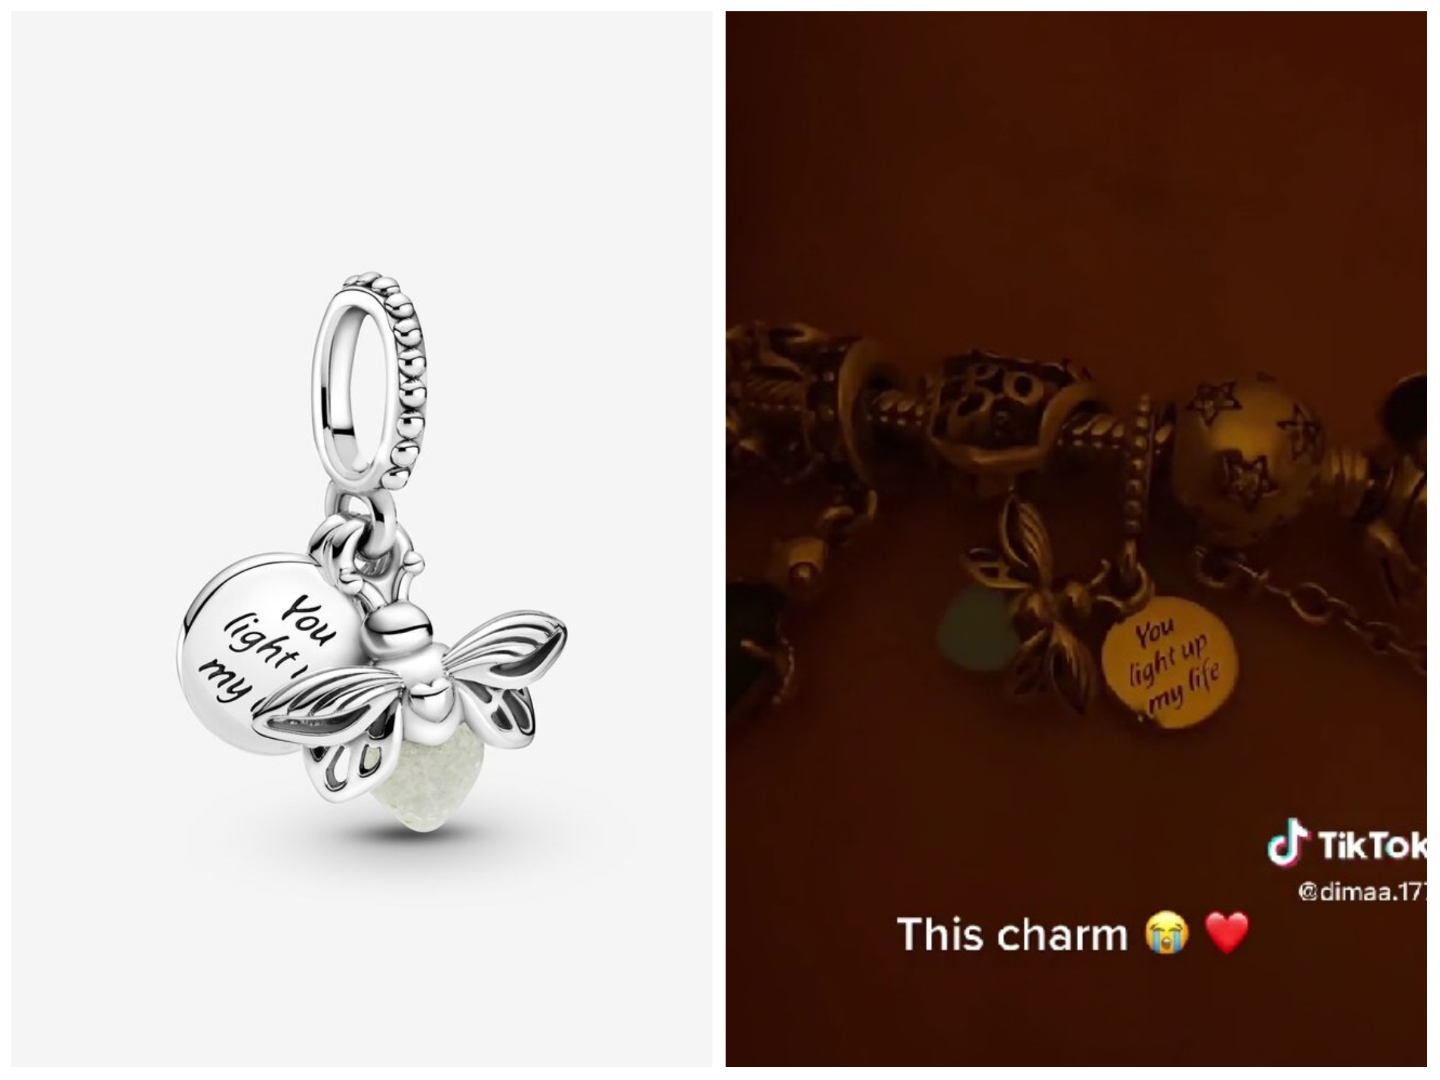 This Pandora firefly charm selling after going viral on TikTok